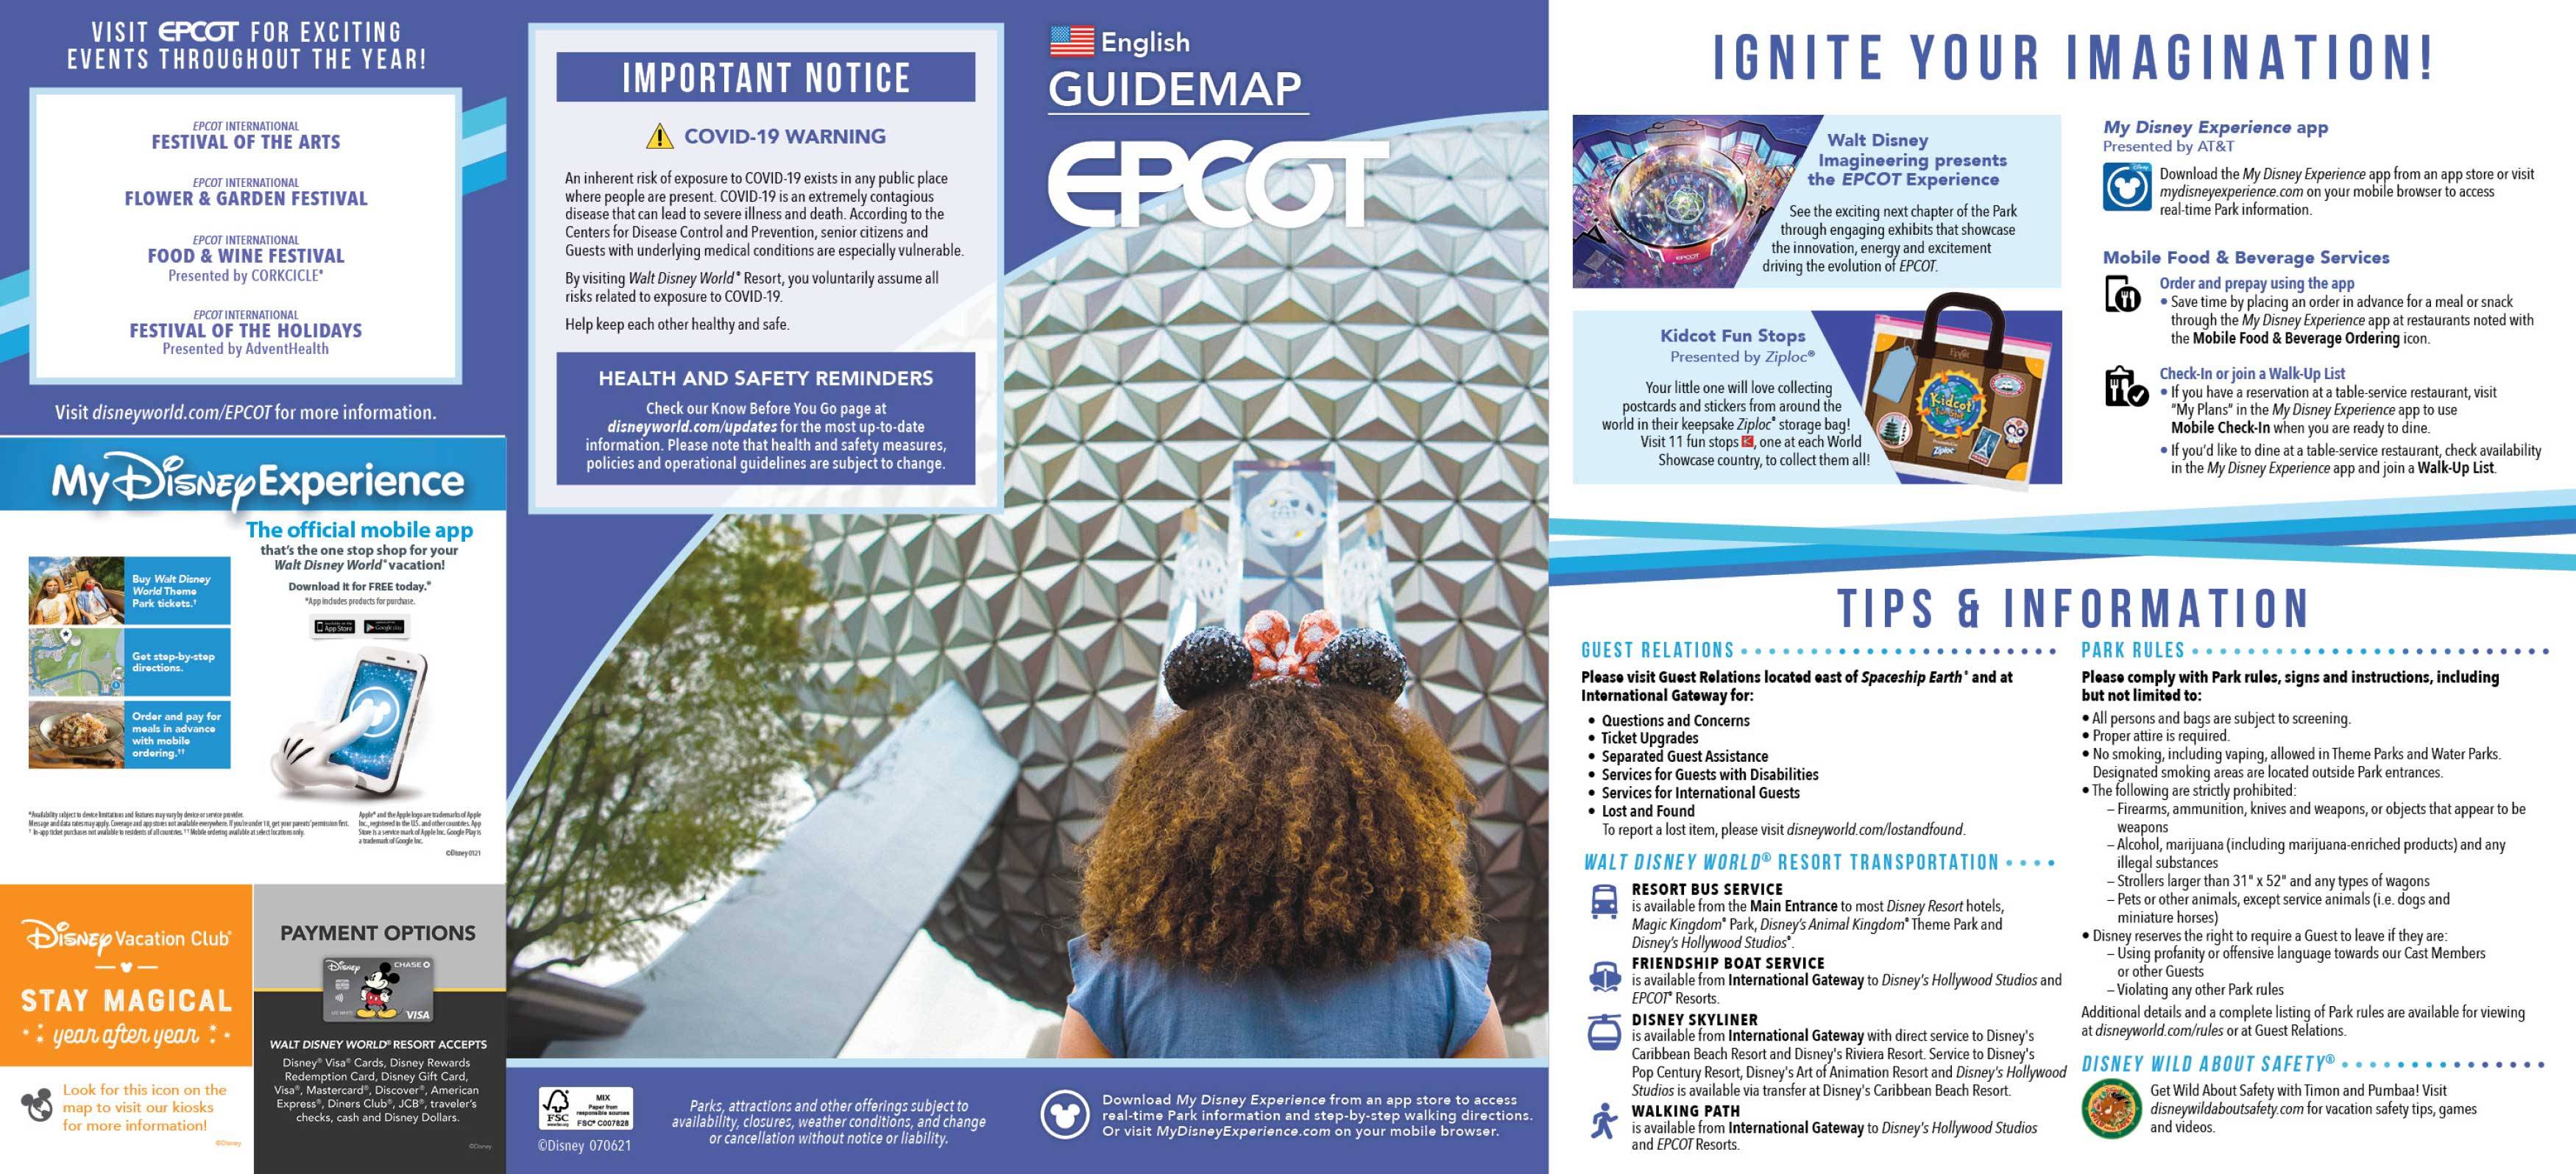 EPCOT Guide map July 2021 - Front